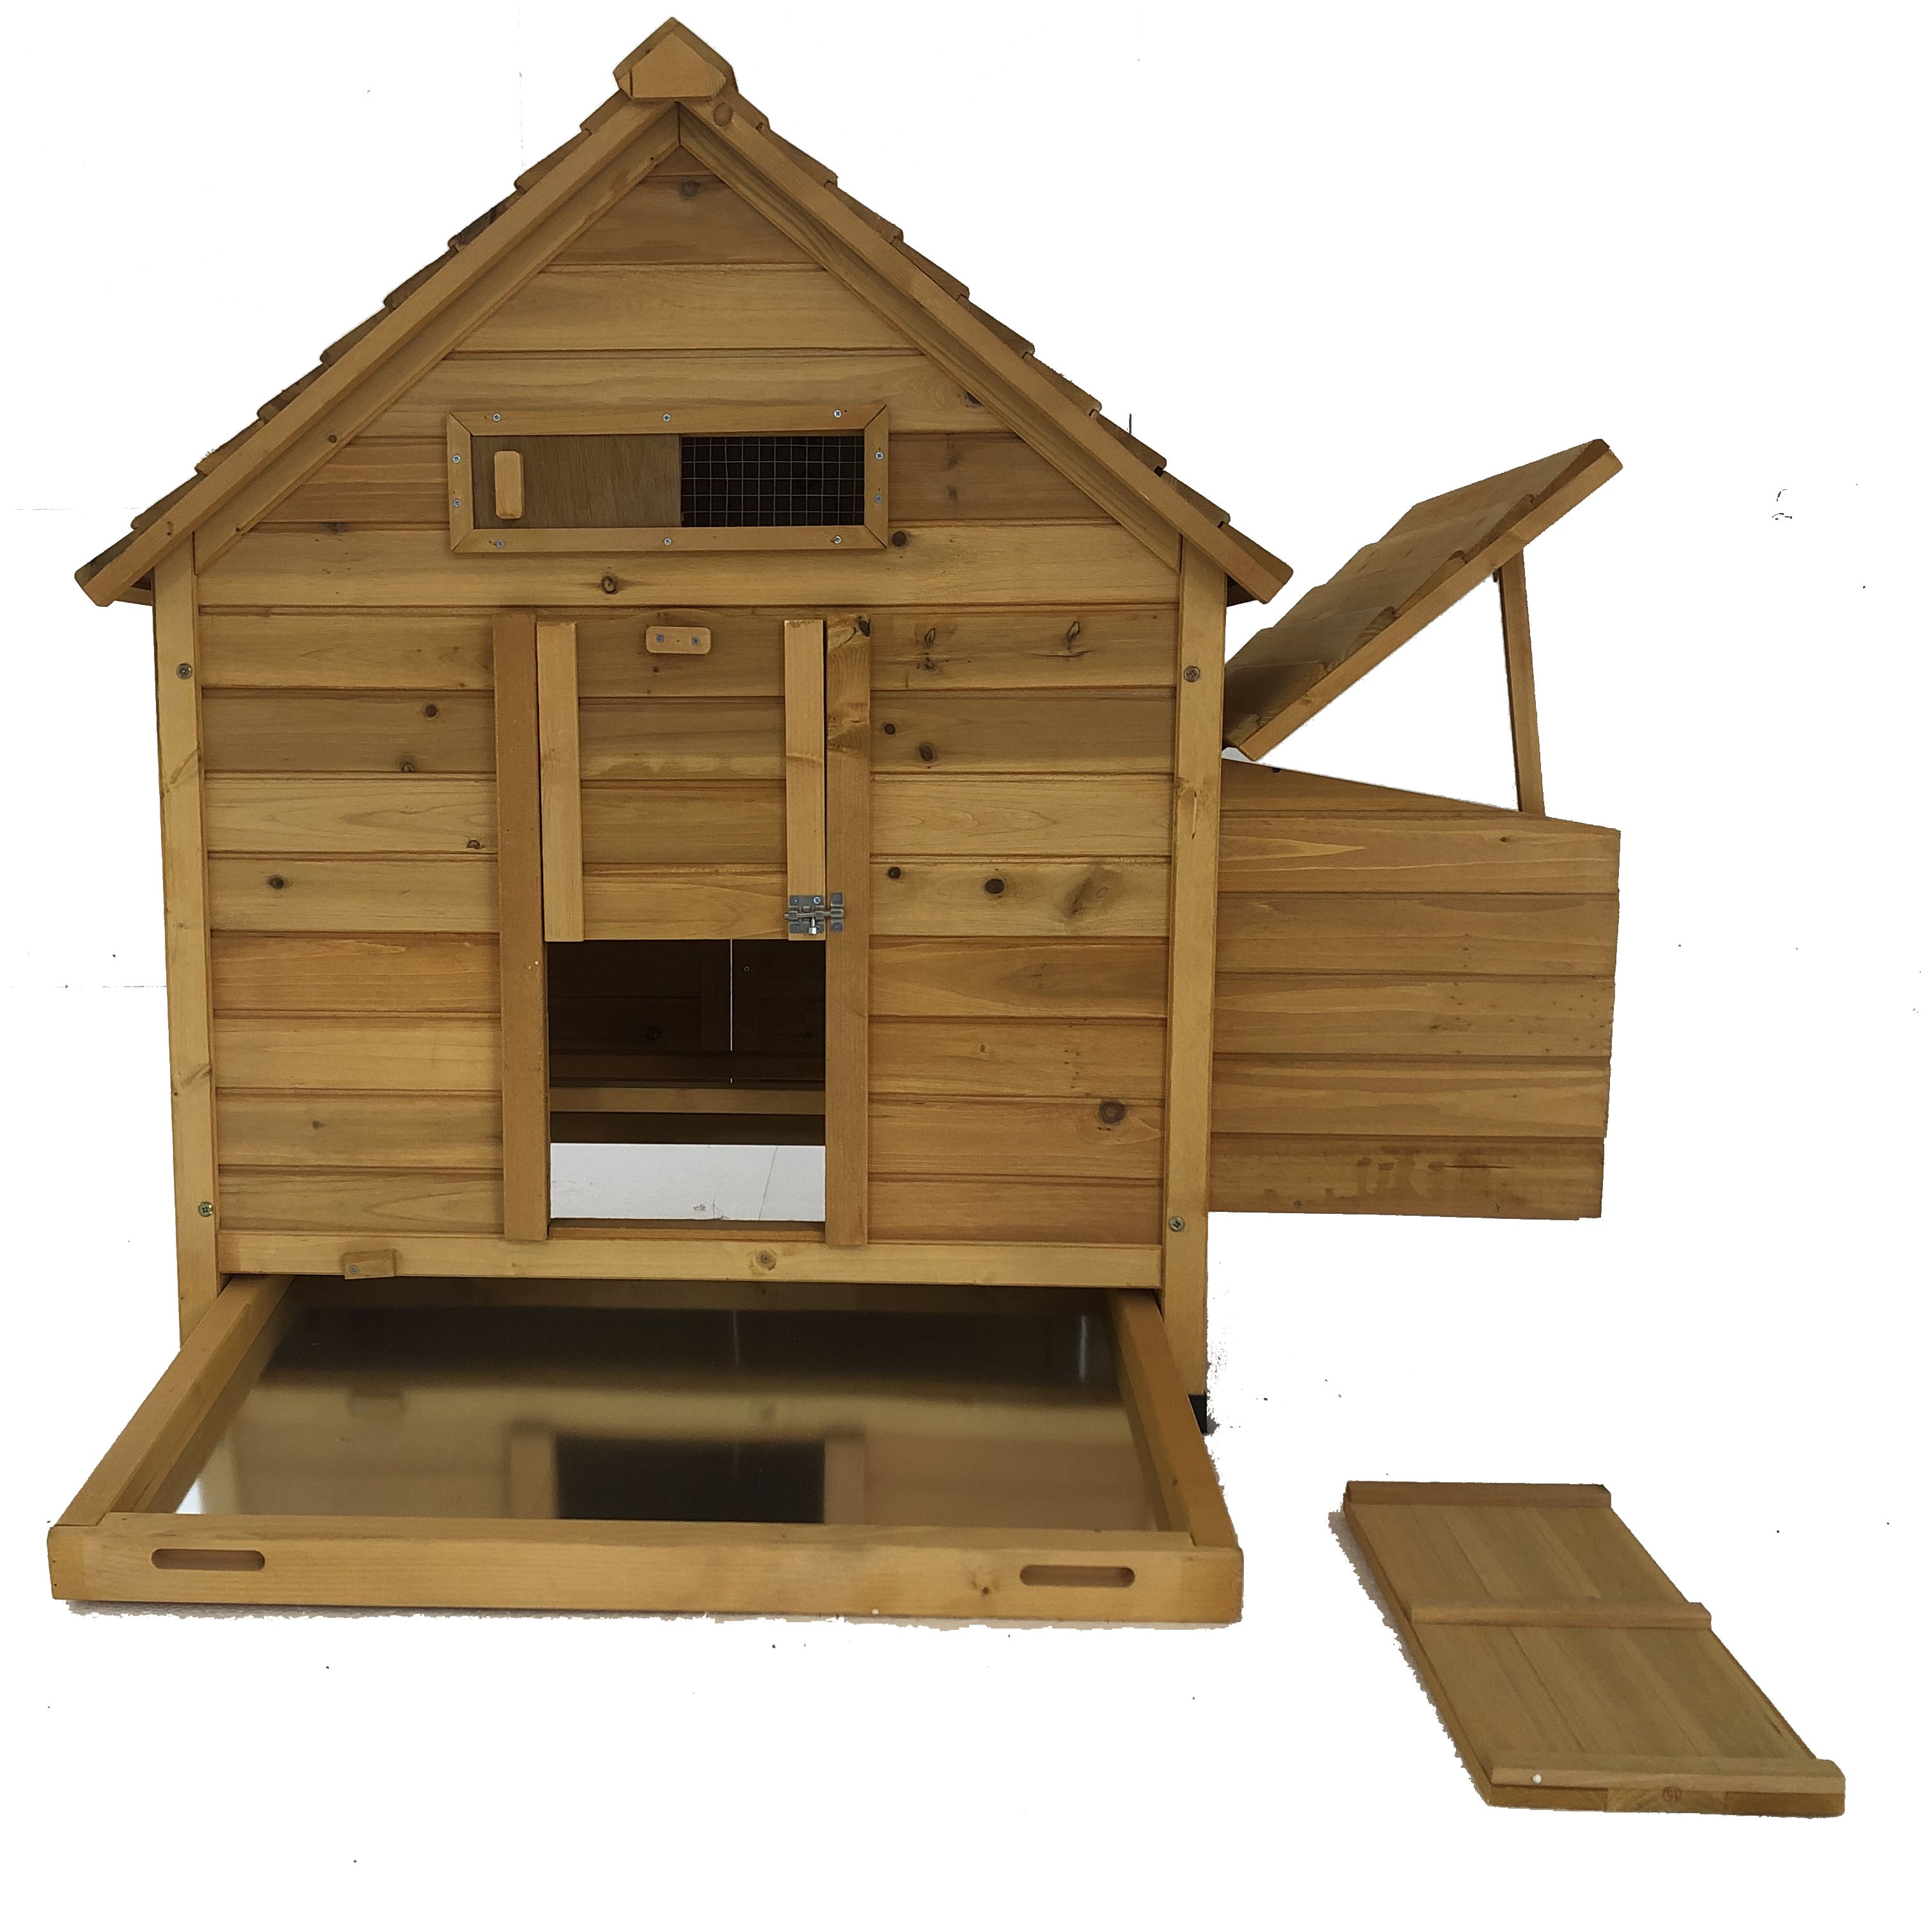 New Delivery for Homemade Bunny Cage -
 Small Animal Cage Bunny Hutch with Removable Tray and Ramp wooden chicken coop – Easy